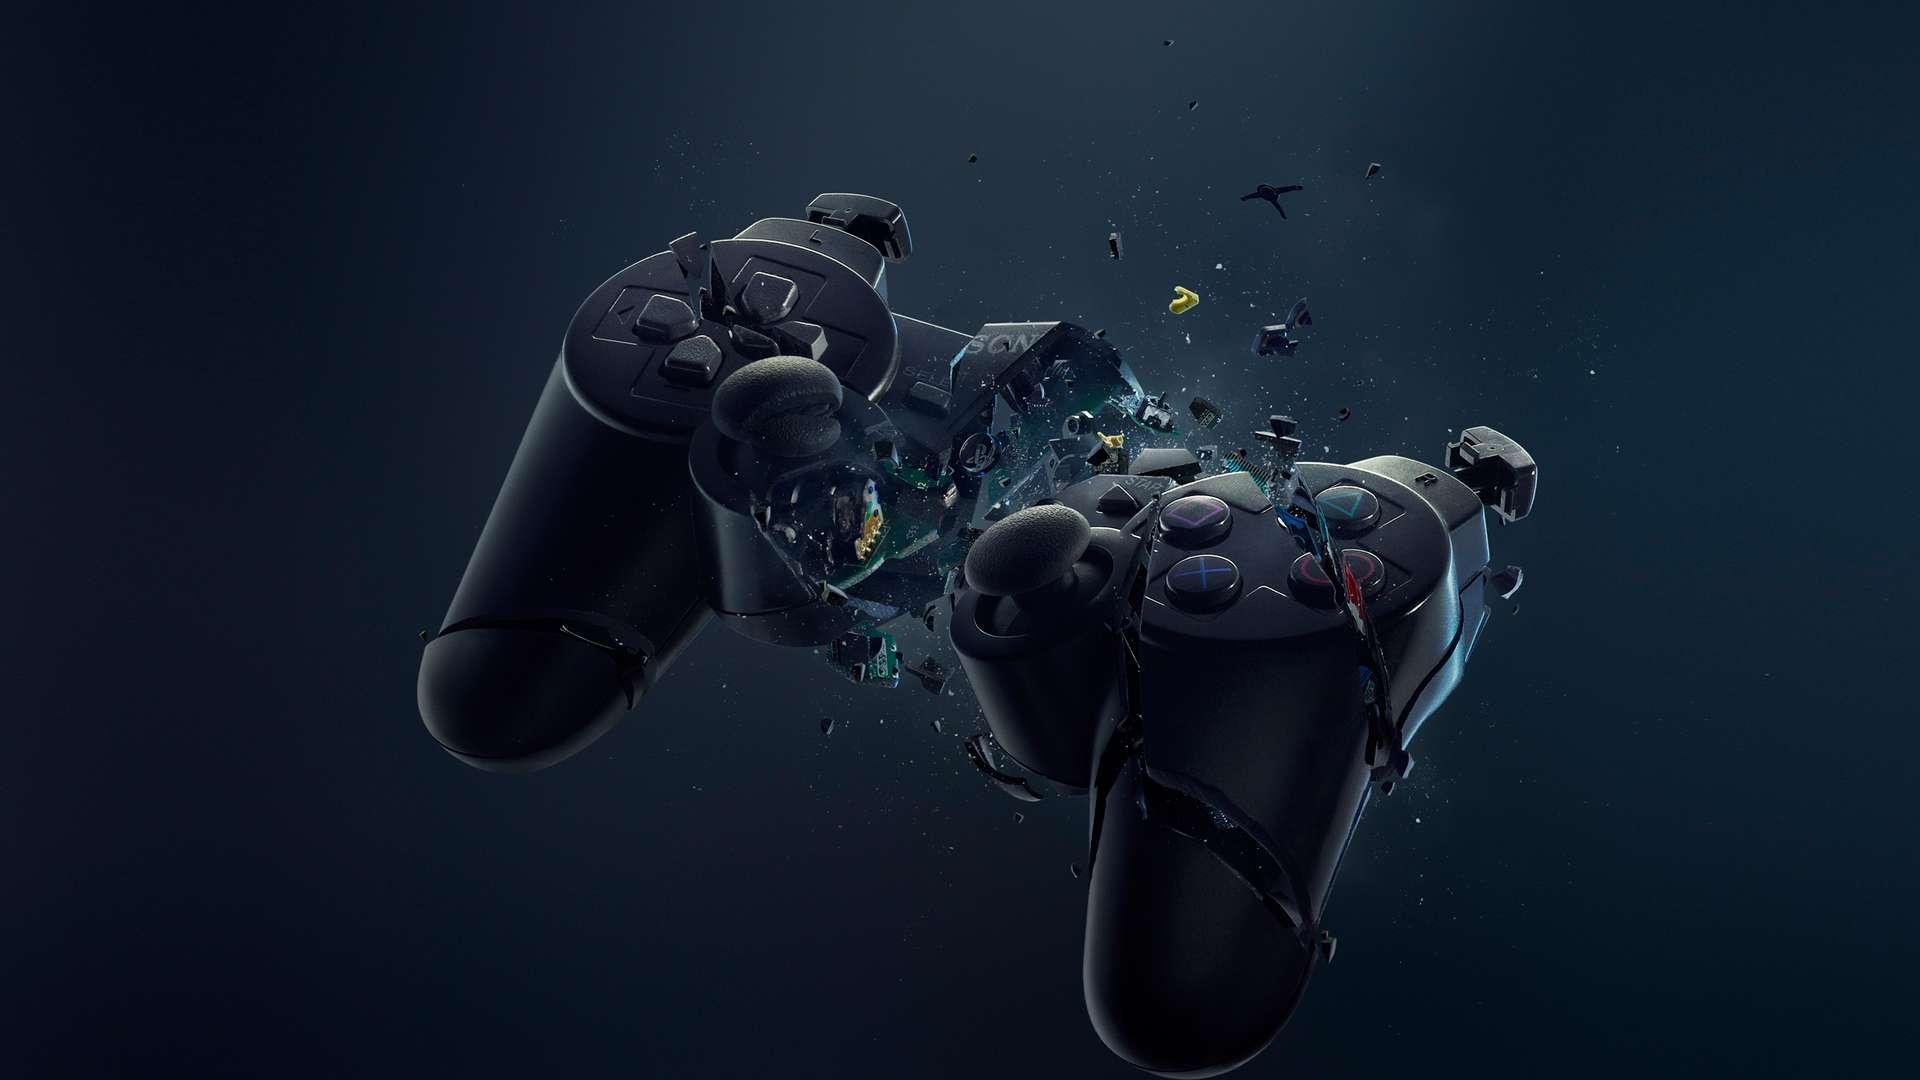 Playstation 4 Controller image Generation Gamers